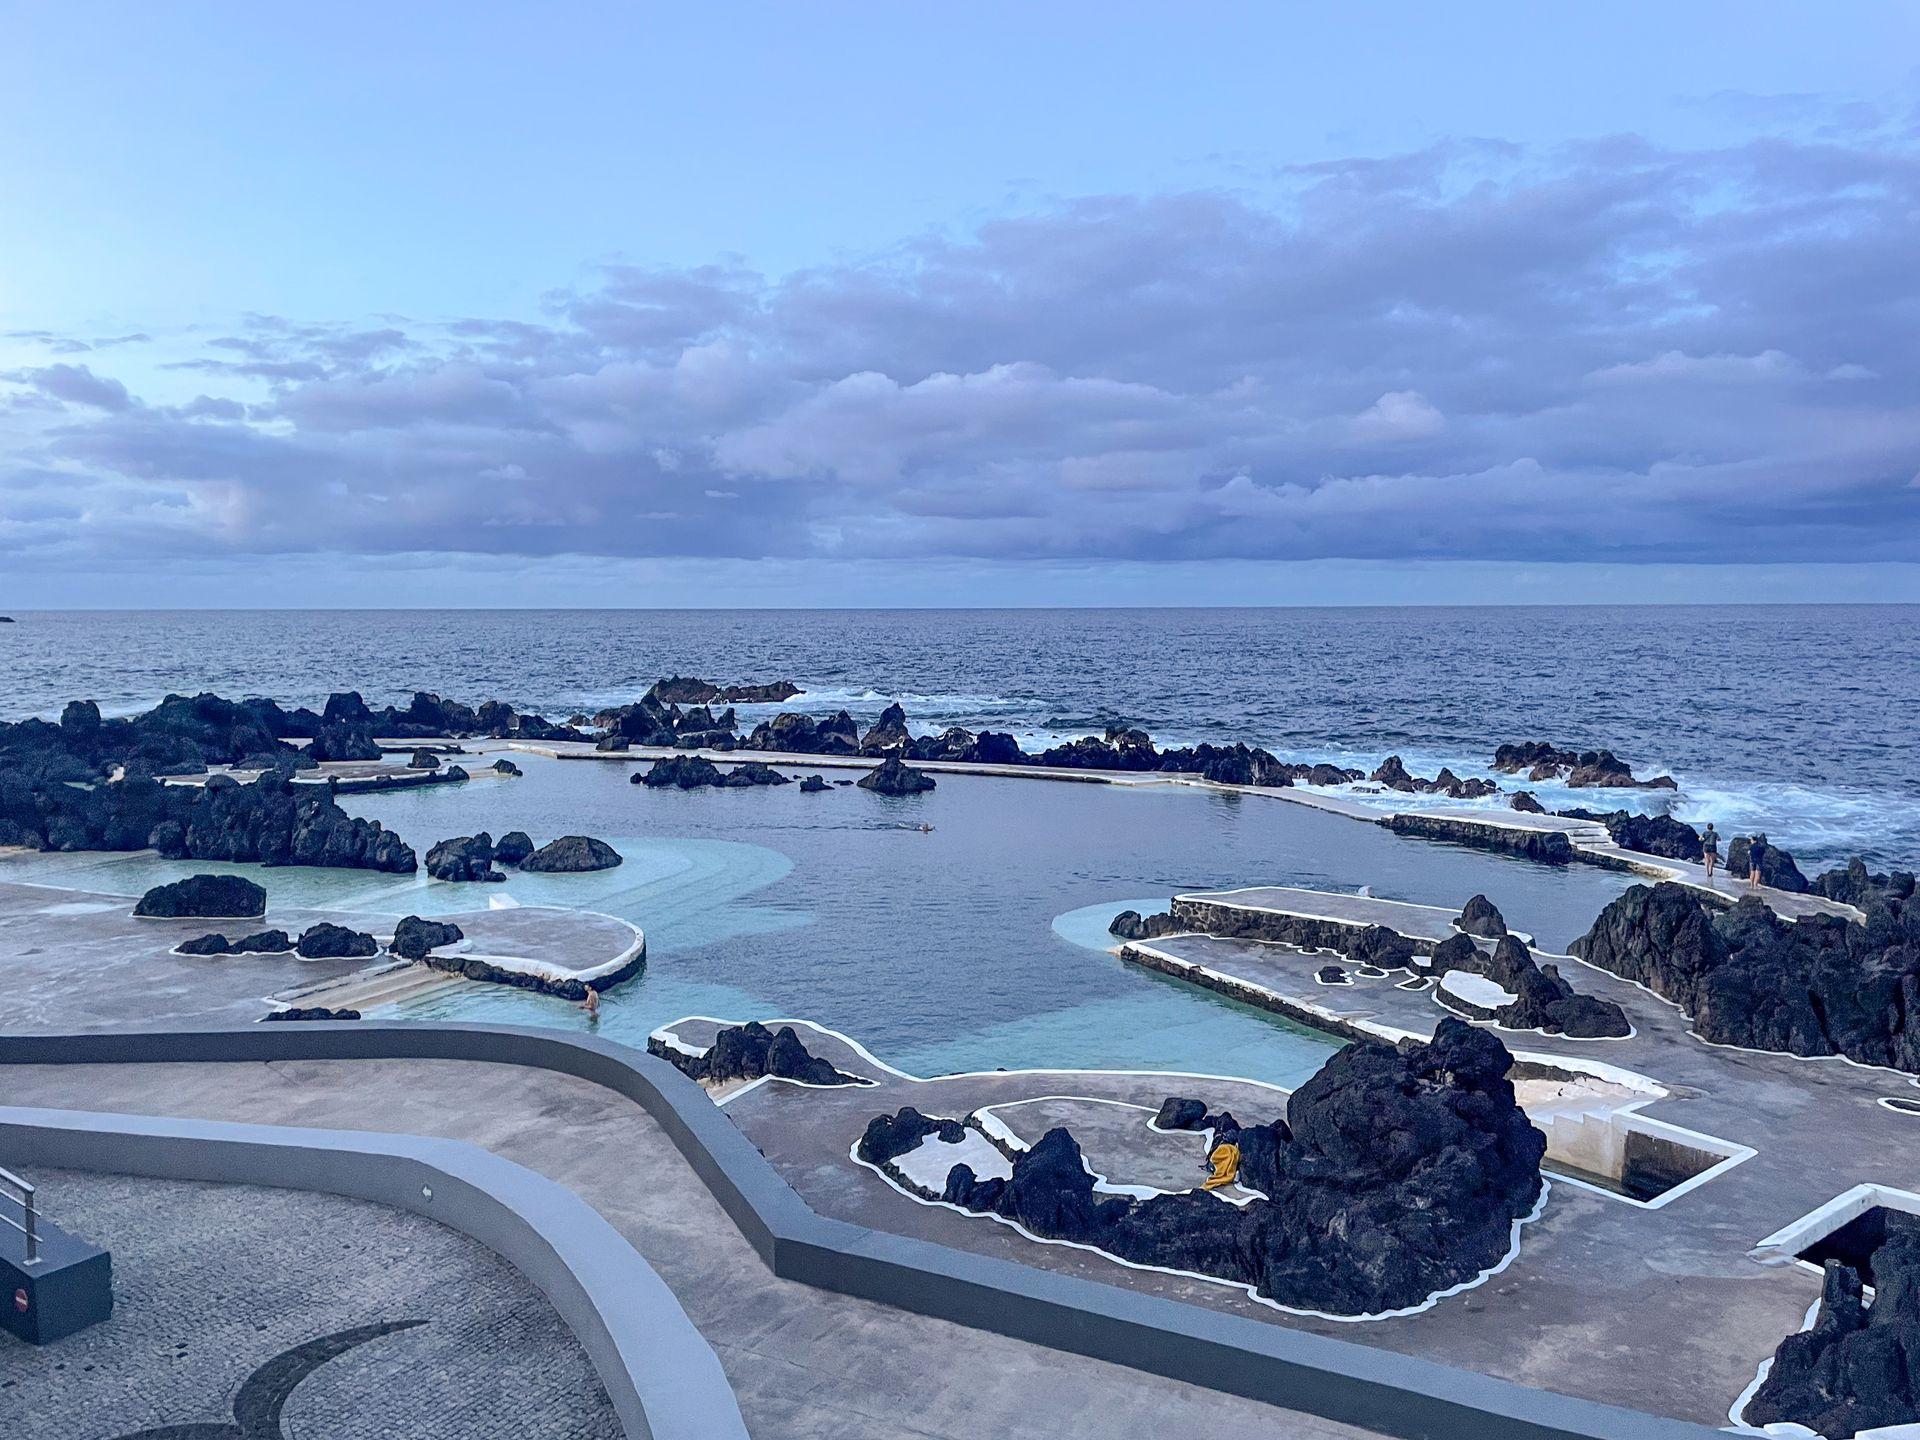 A swimming area surrounded by patches of black, volcanic rocks